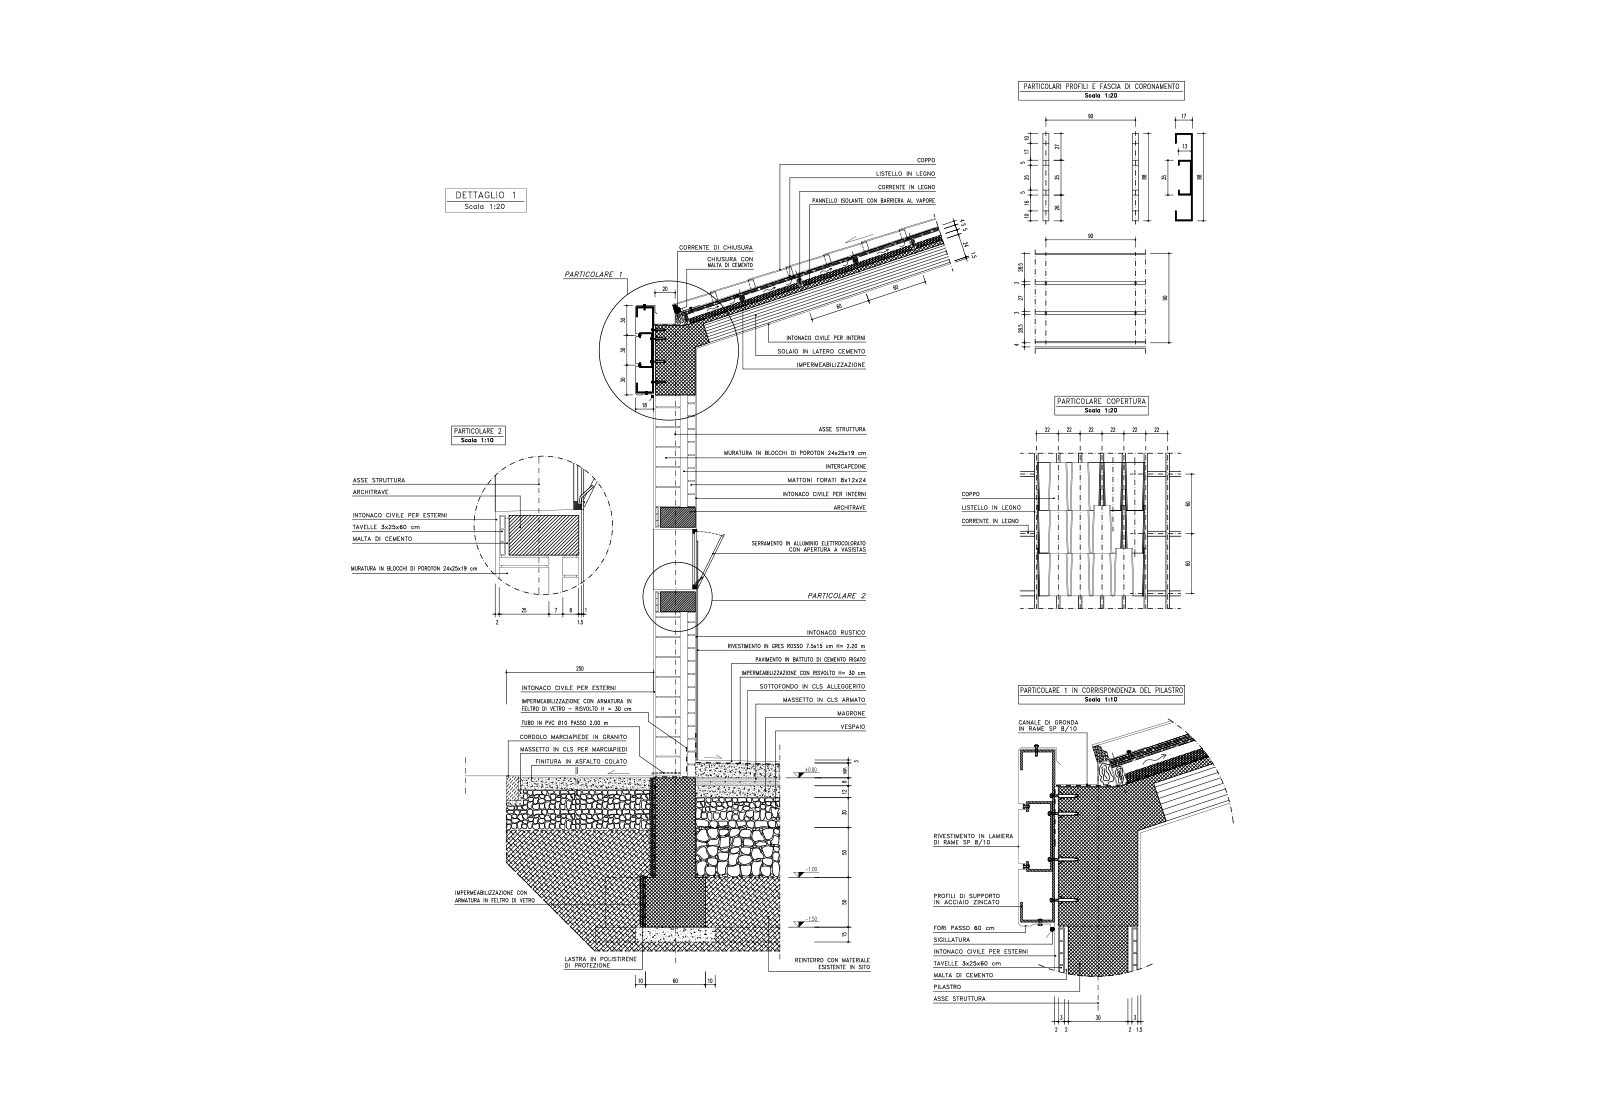 Faculty of Veterinary in Matelica - Construction details building C